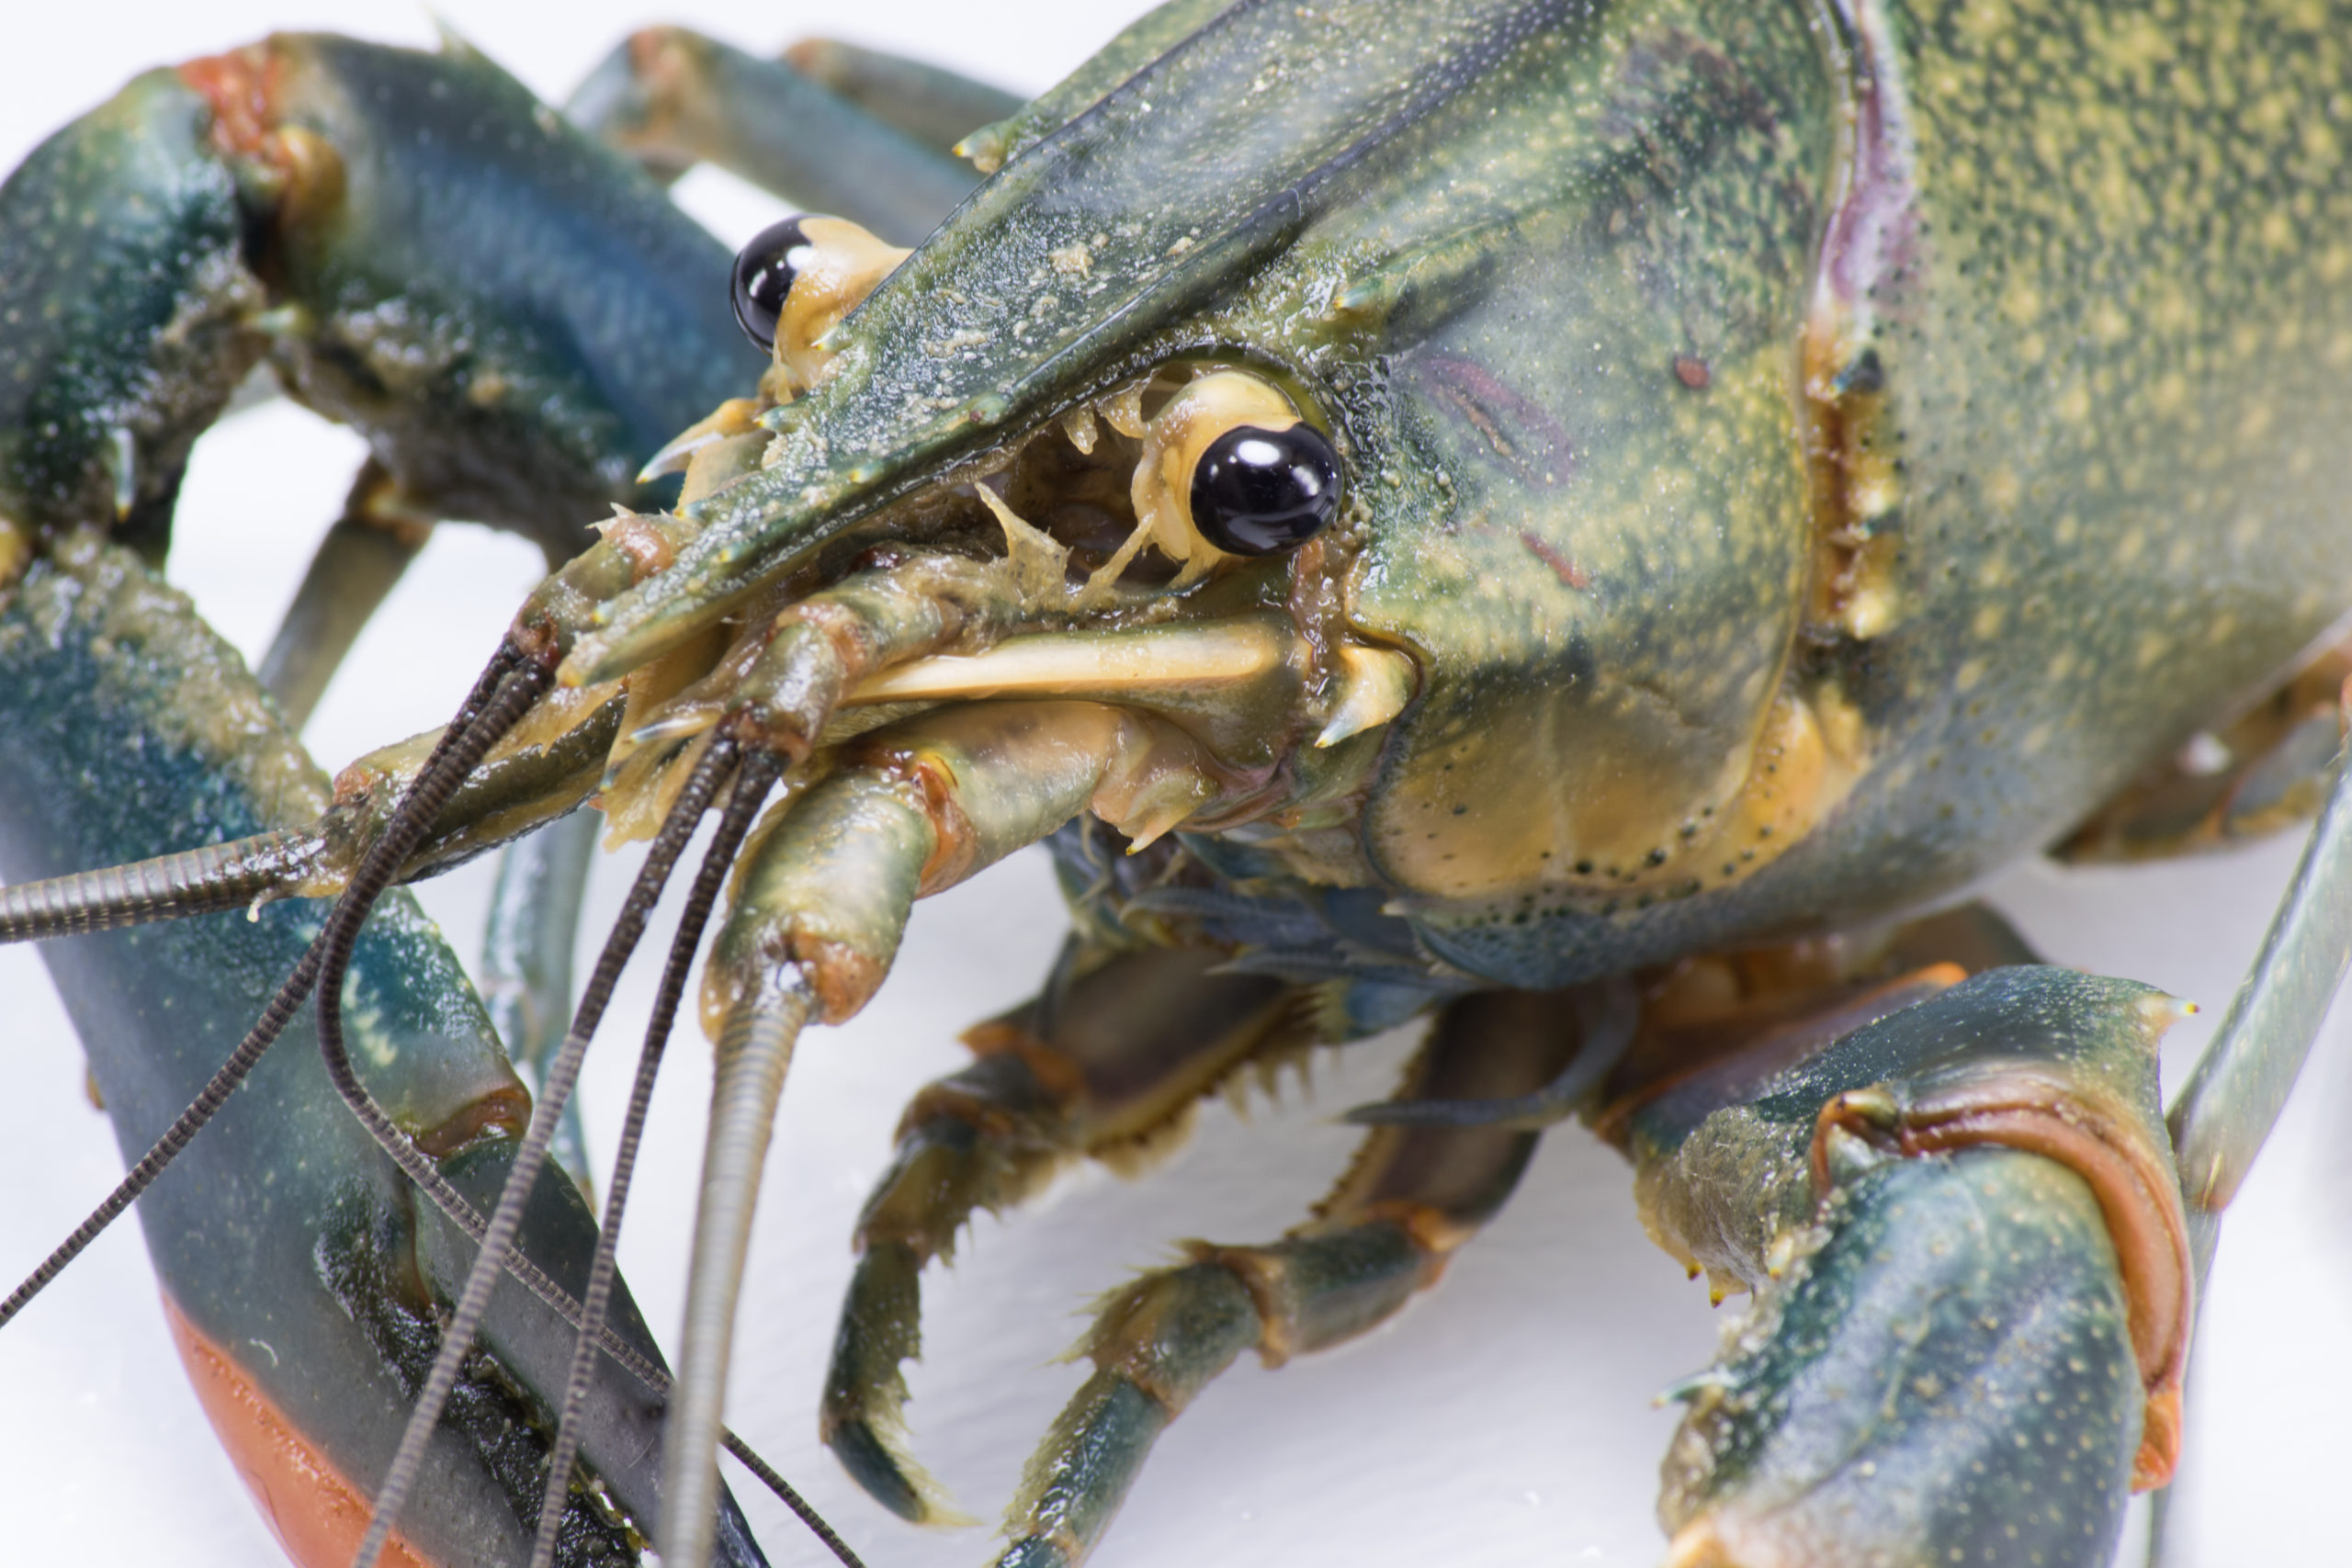 A close-up of the head, beady eyes, and big claws of a Australian redclaw crayfish, set on a white background.